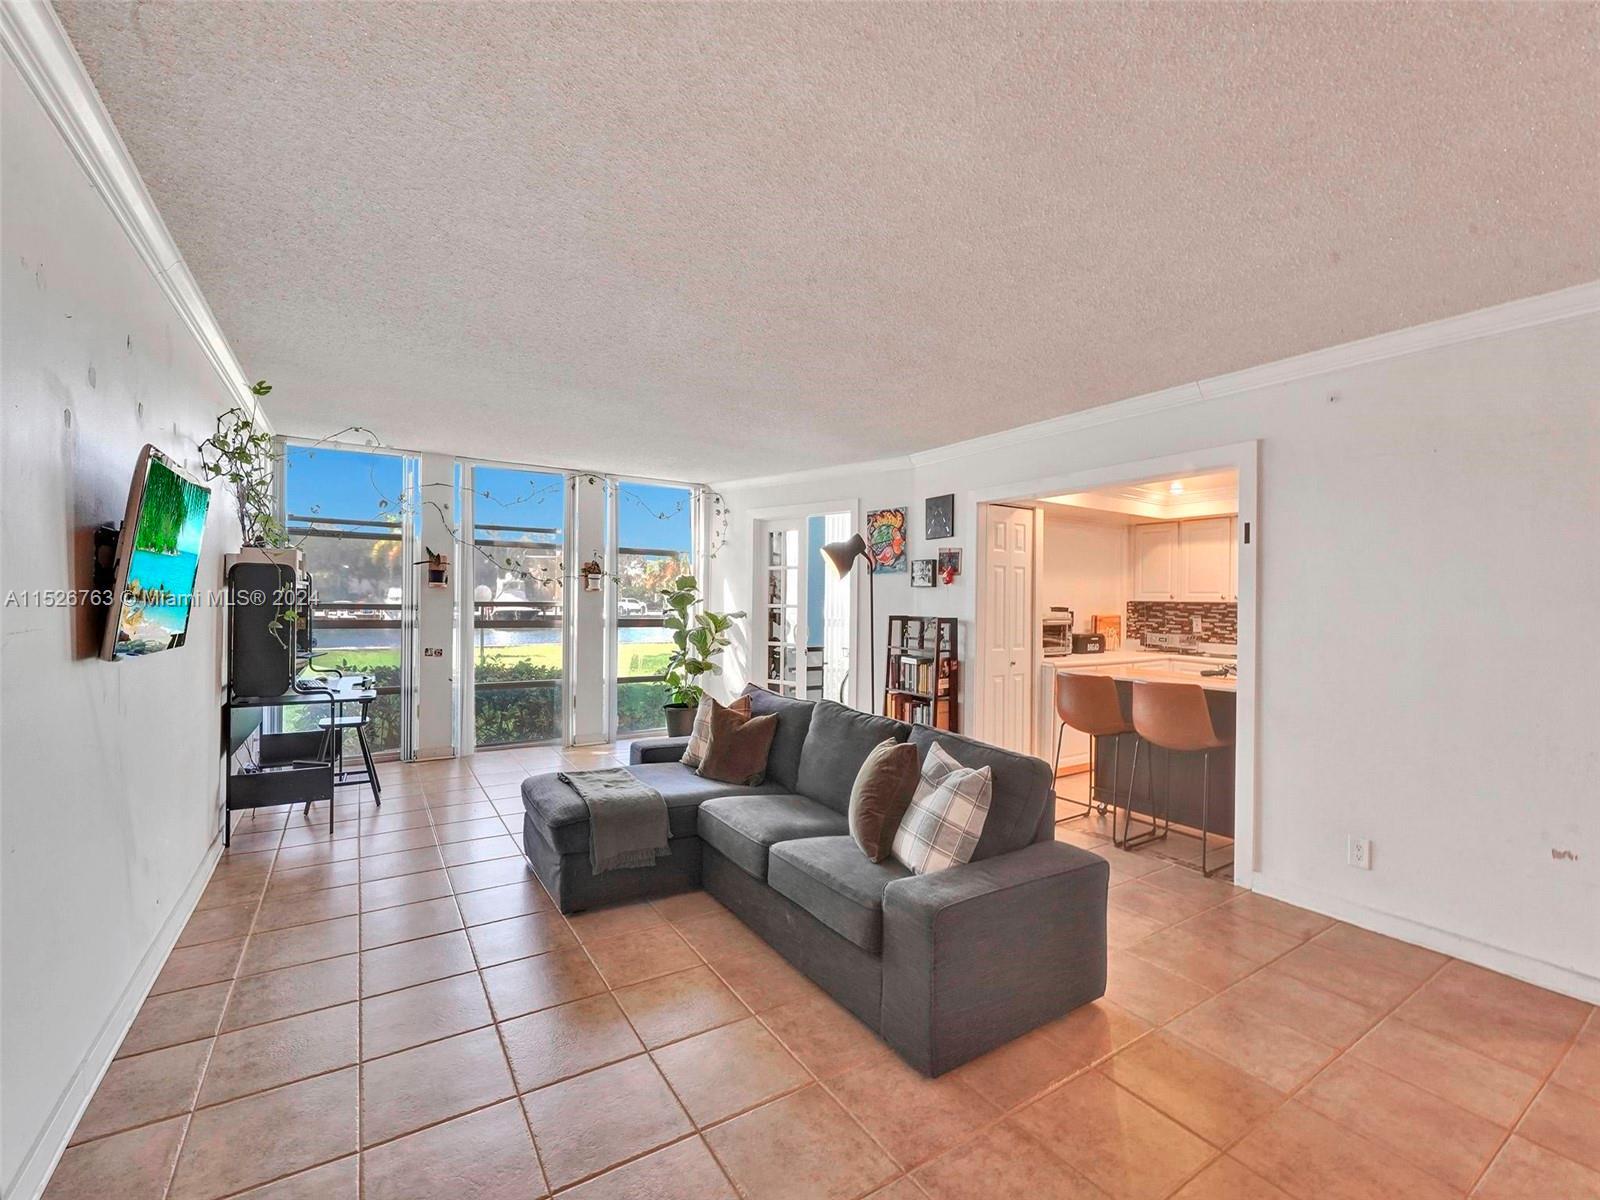 Experience waterfront living in this 3-bedroom, 2-bathroom apartment boasting panoramic bay views. S